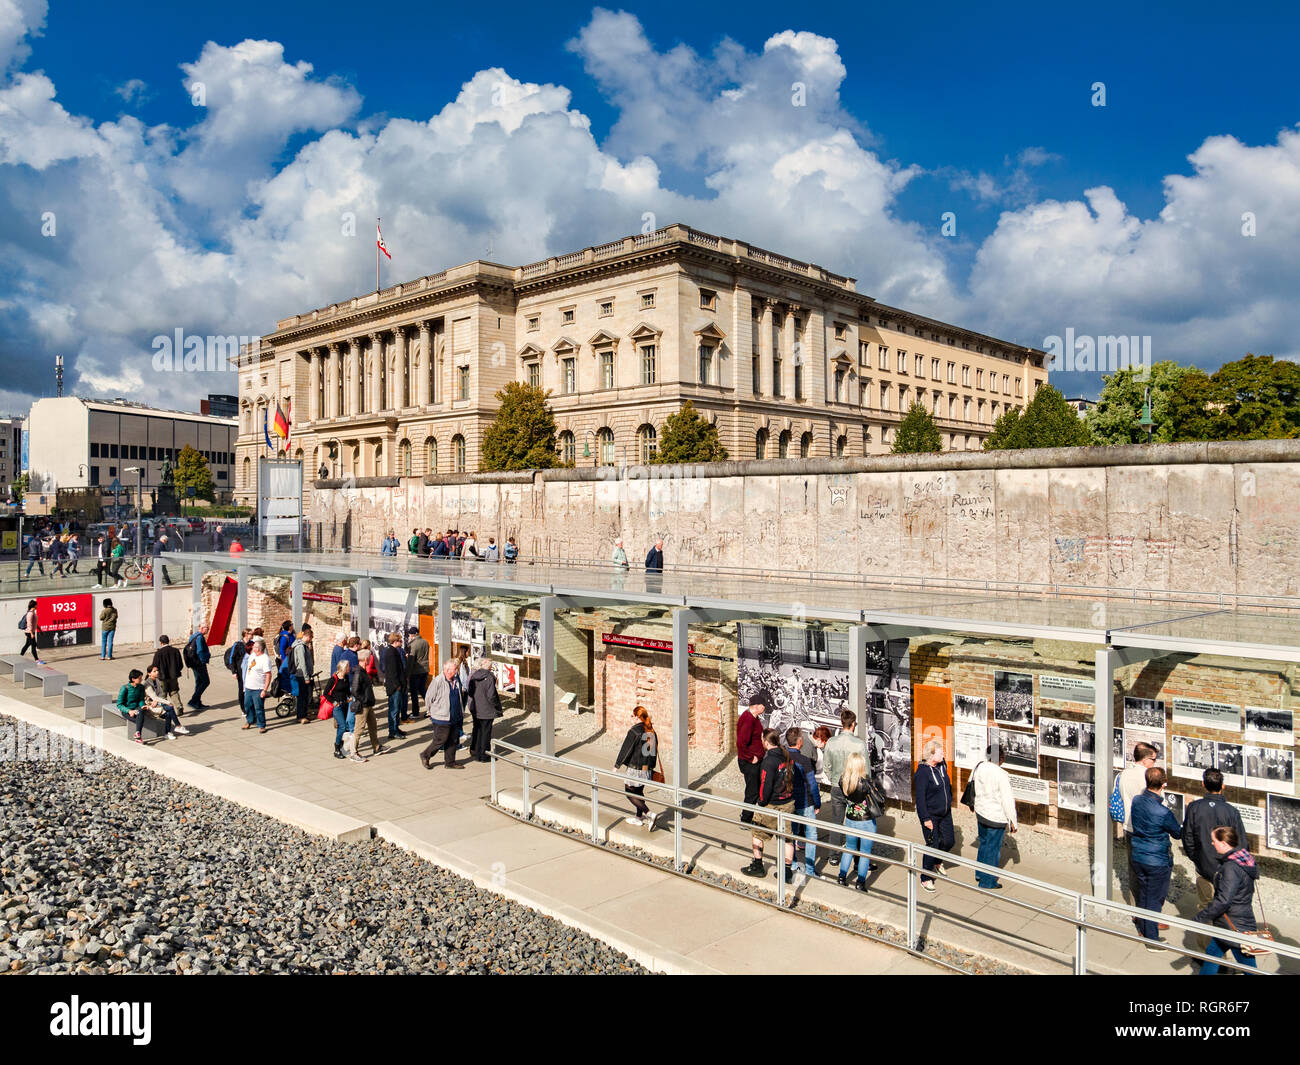 22 September 2018: Berlin, Germany - Tourists sightseeing at a preserved section of the Berlin Wall at Topography of Terror, on  Niederkirchnerstrasse Stock Photo